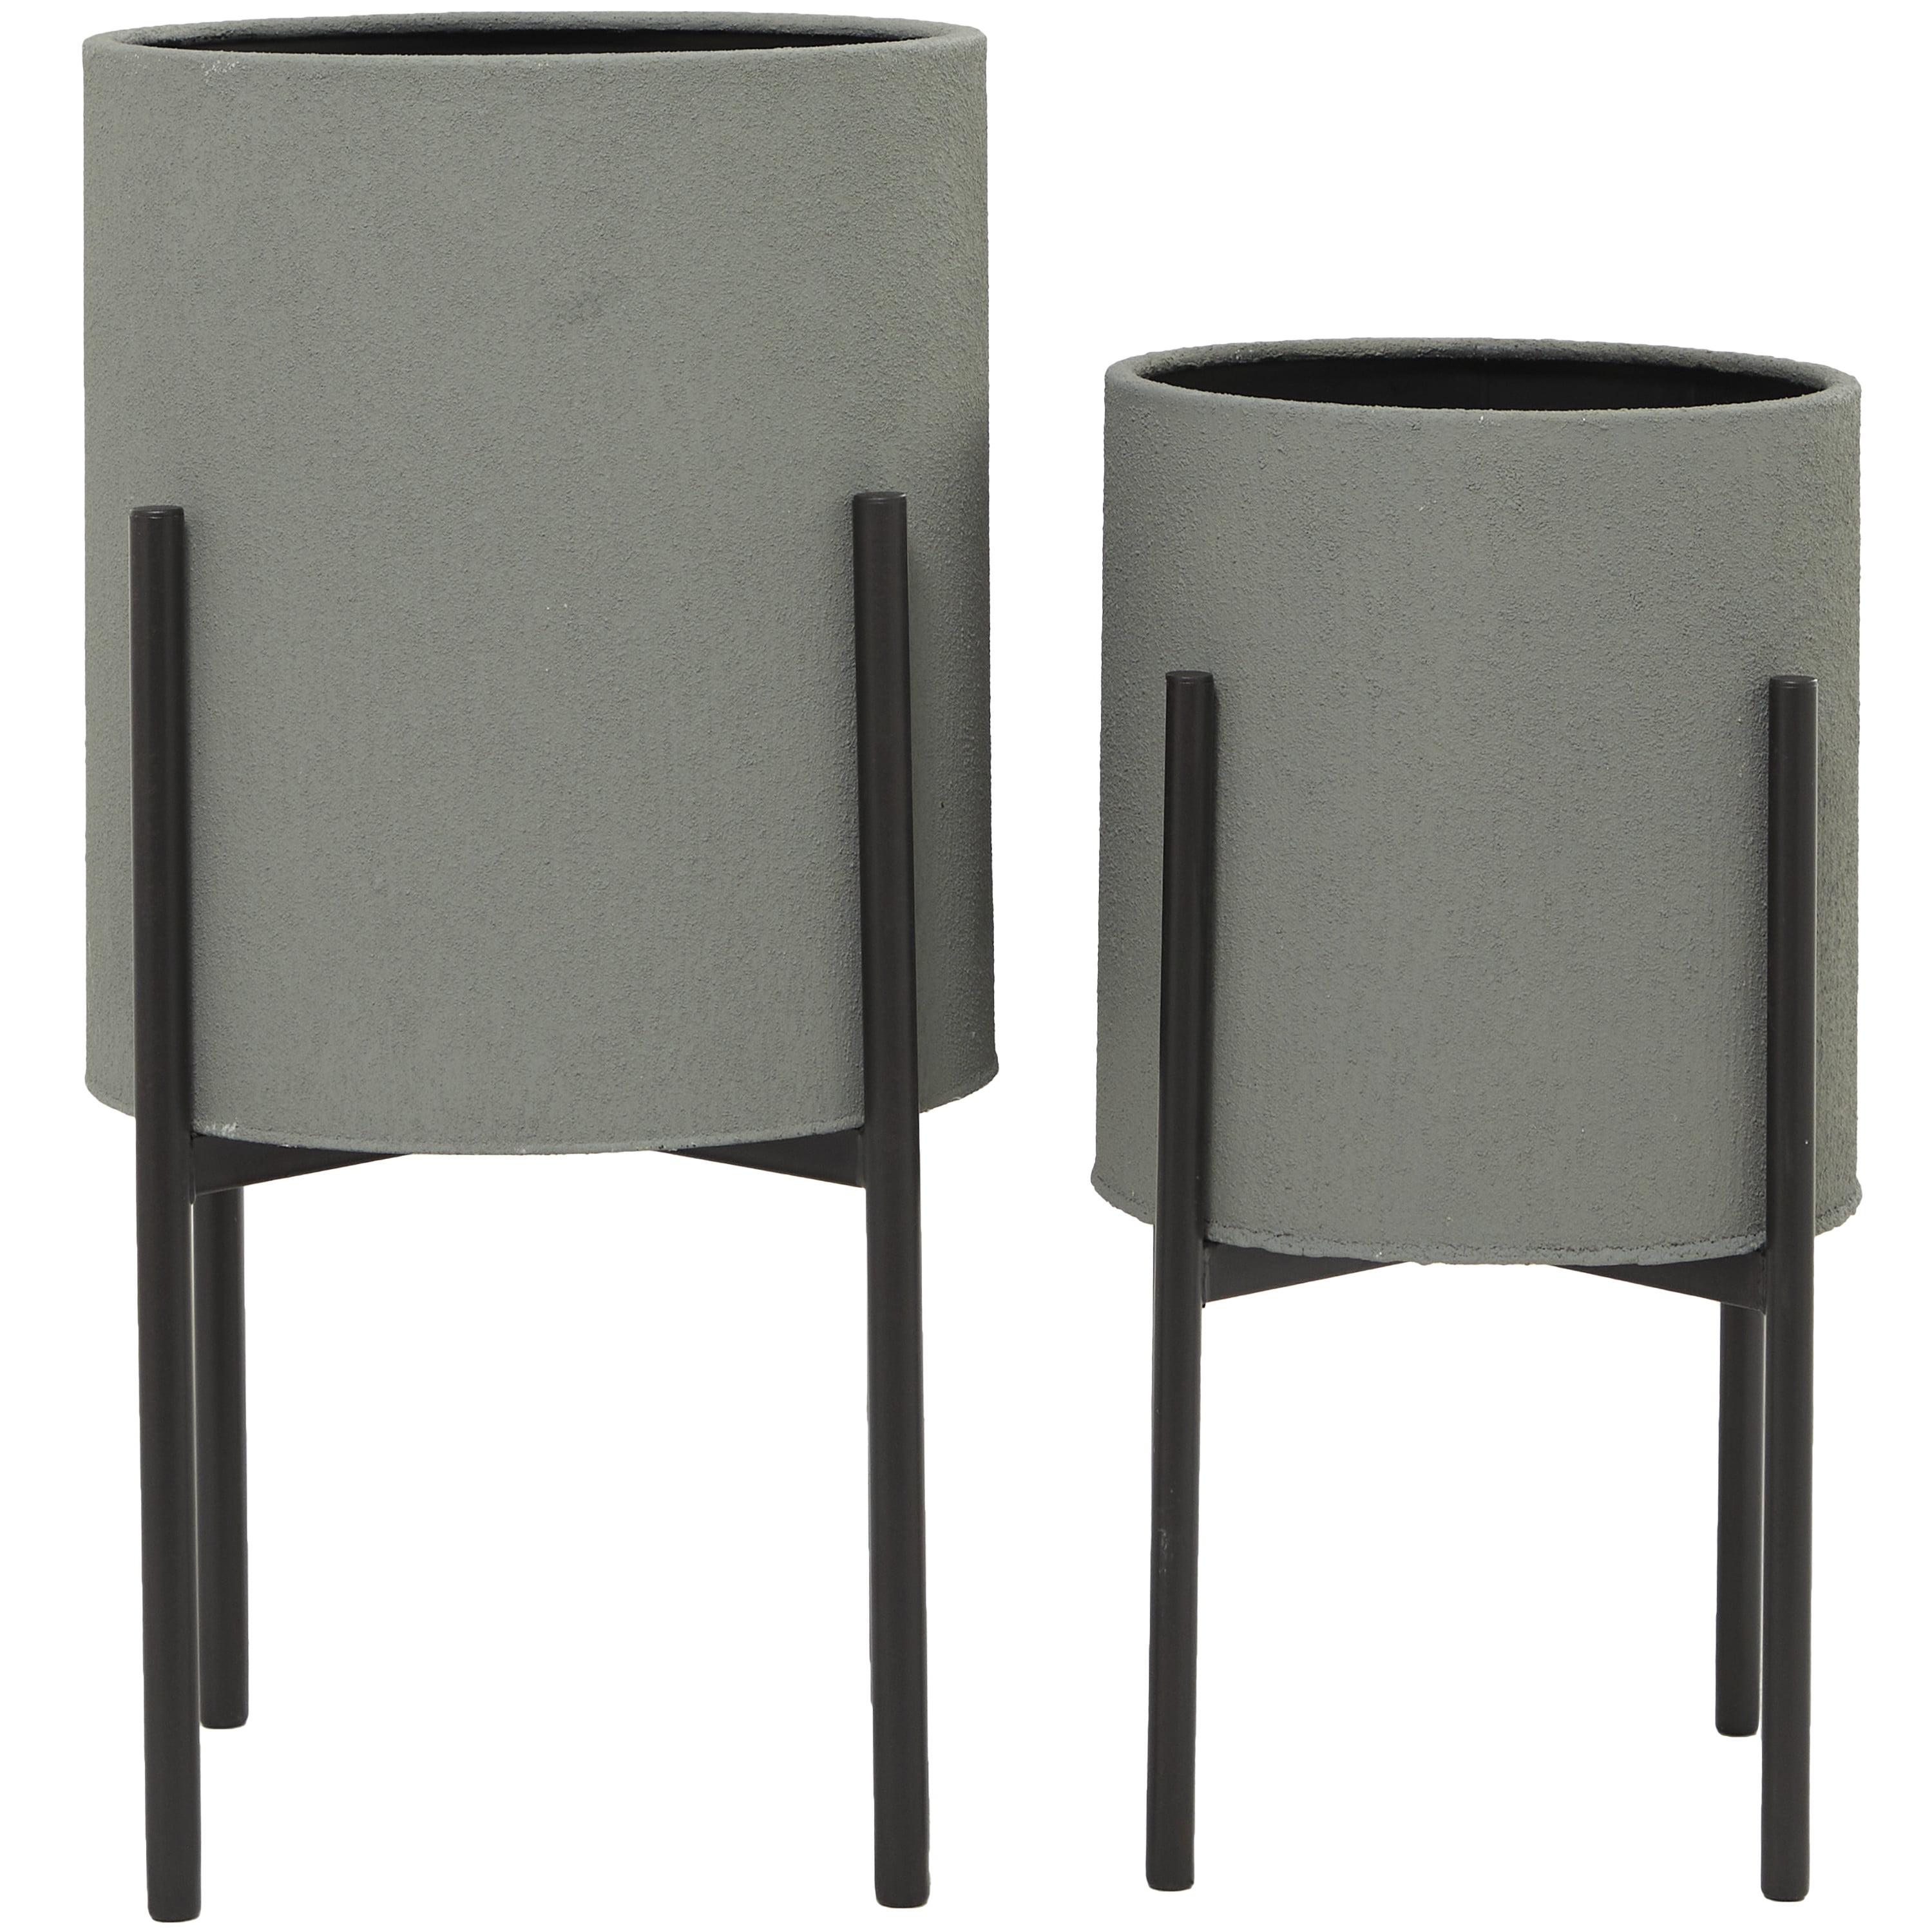 Modern Gray Iron Planters Set of 2 with Removable Stand - Indoor/Outdoor